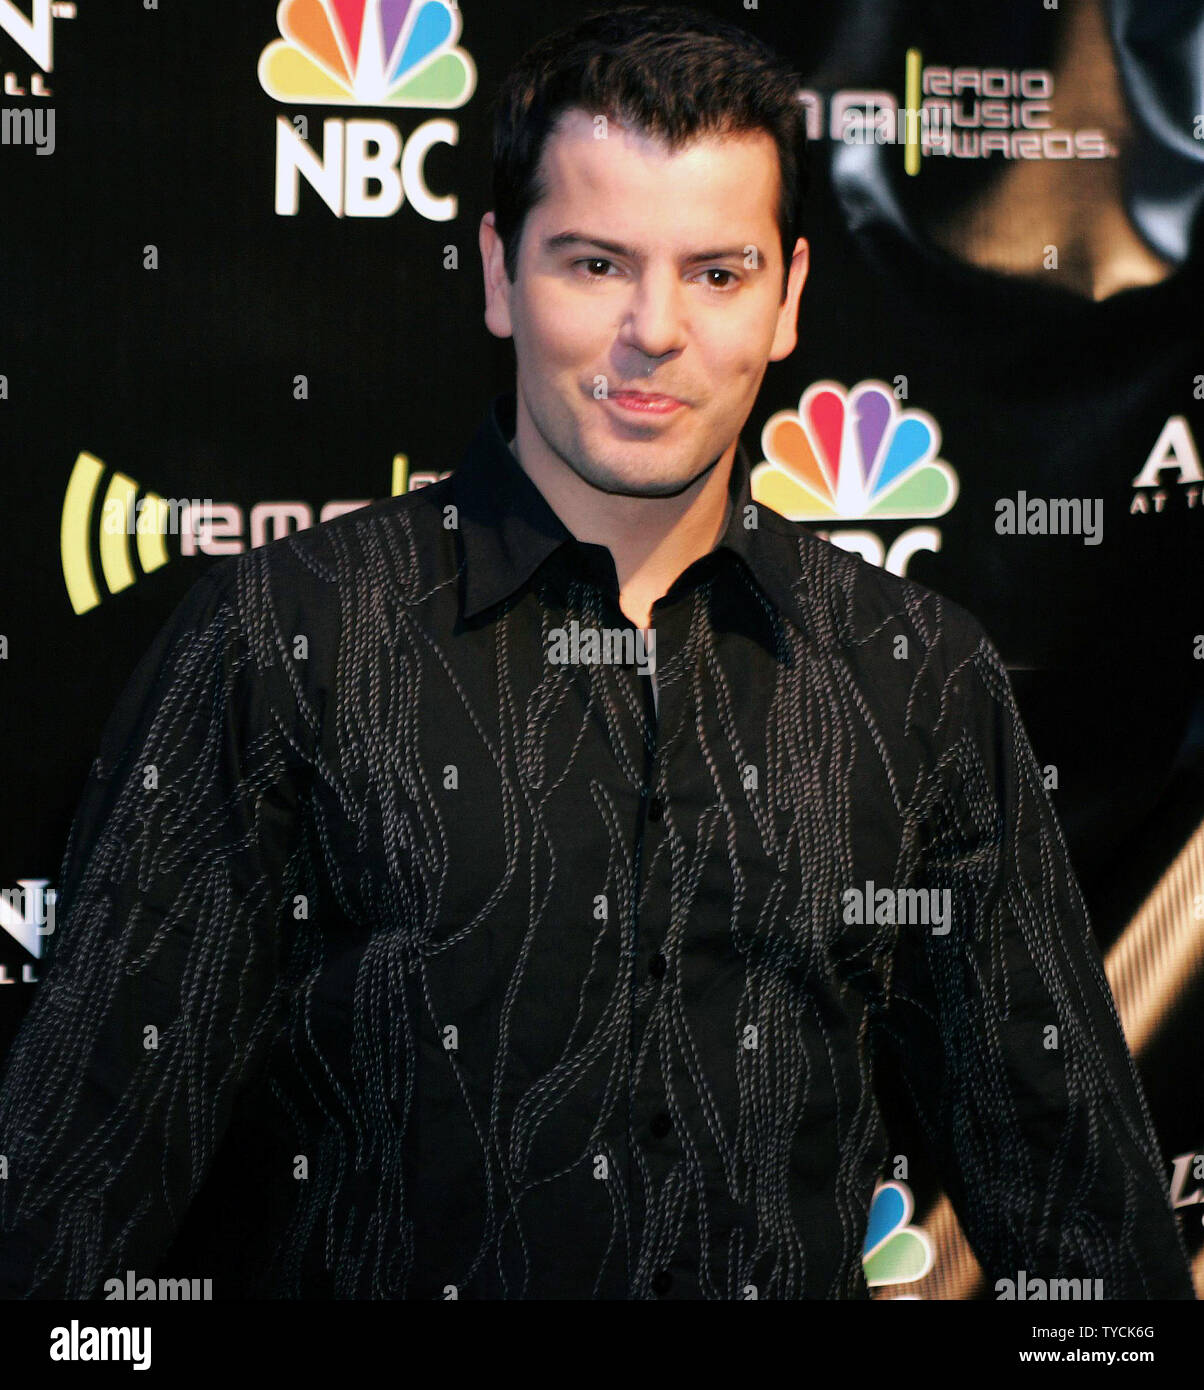 Jordan Knight of New Kids on the Block appeared at the 2004 Radio Music Awards Show at the Aladdin Hotel and Casino, October 25, 2004.    (UPI Photo/Roger Williams) Stock Photo